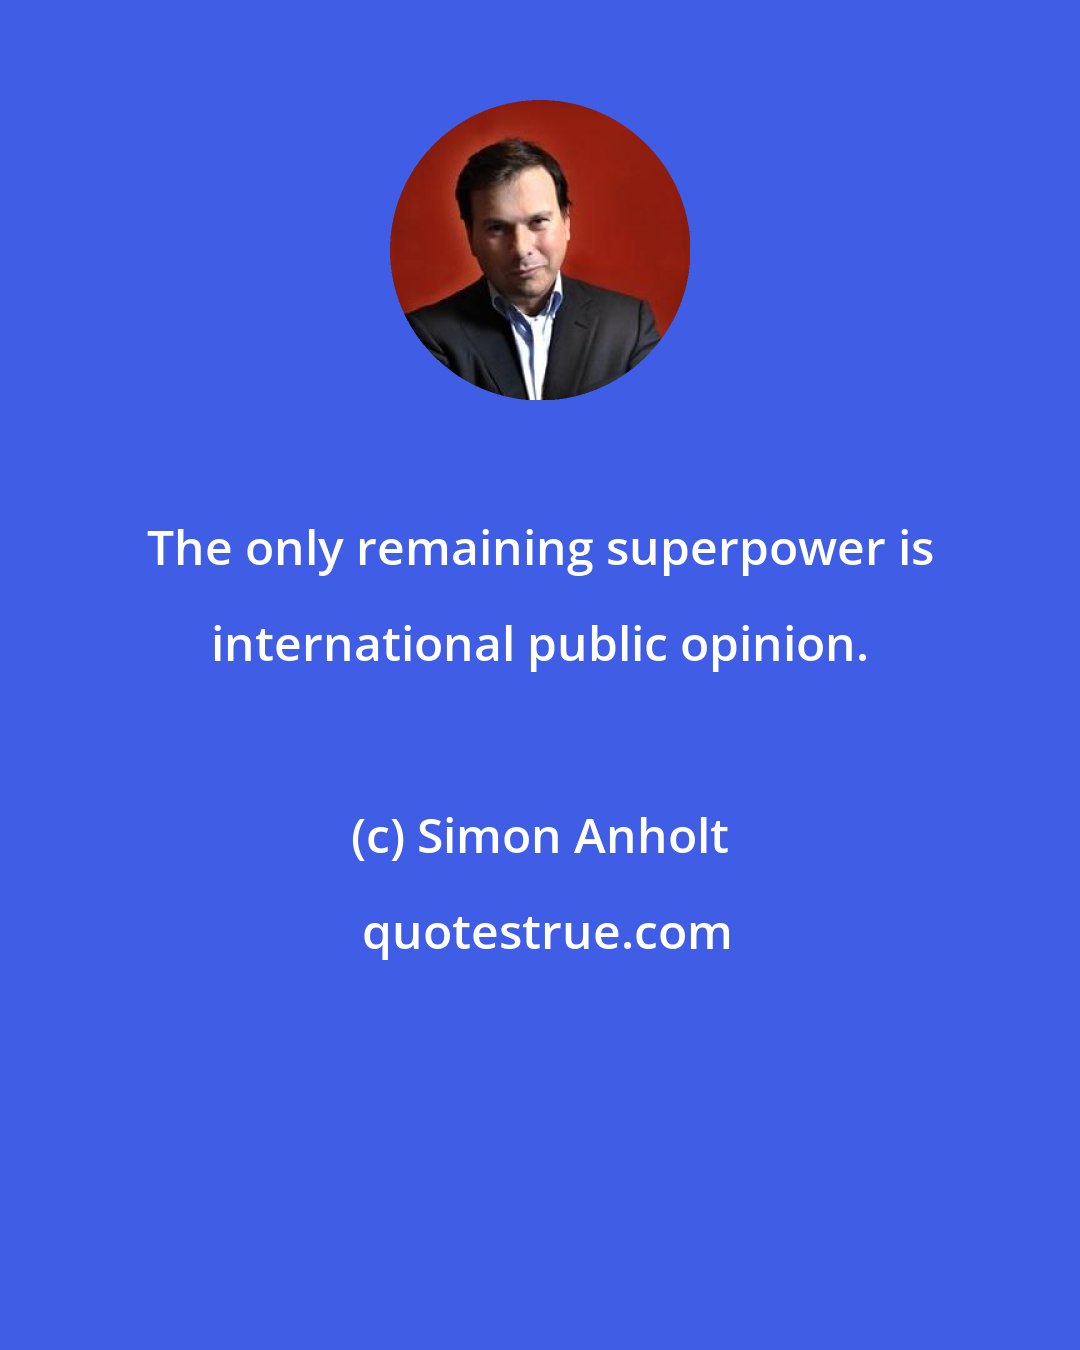 Simon Anholt: The only remaining superpower is international public opinion.